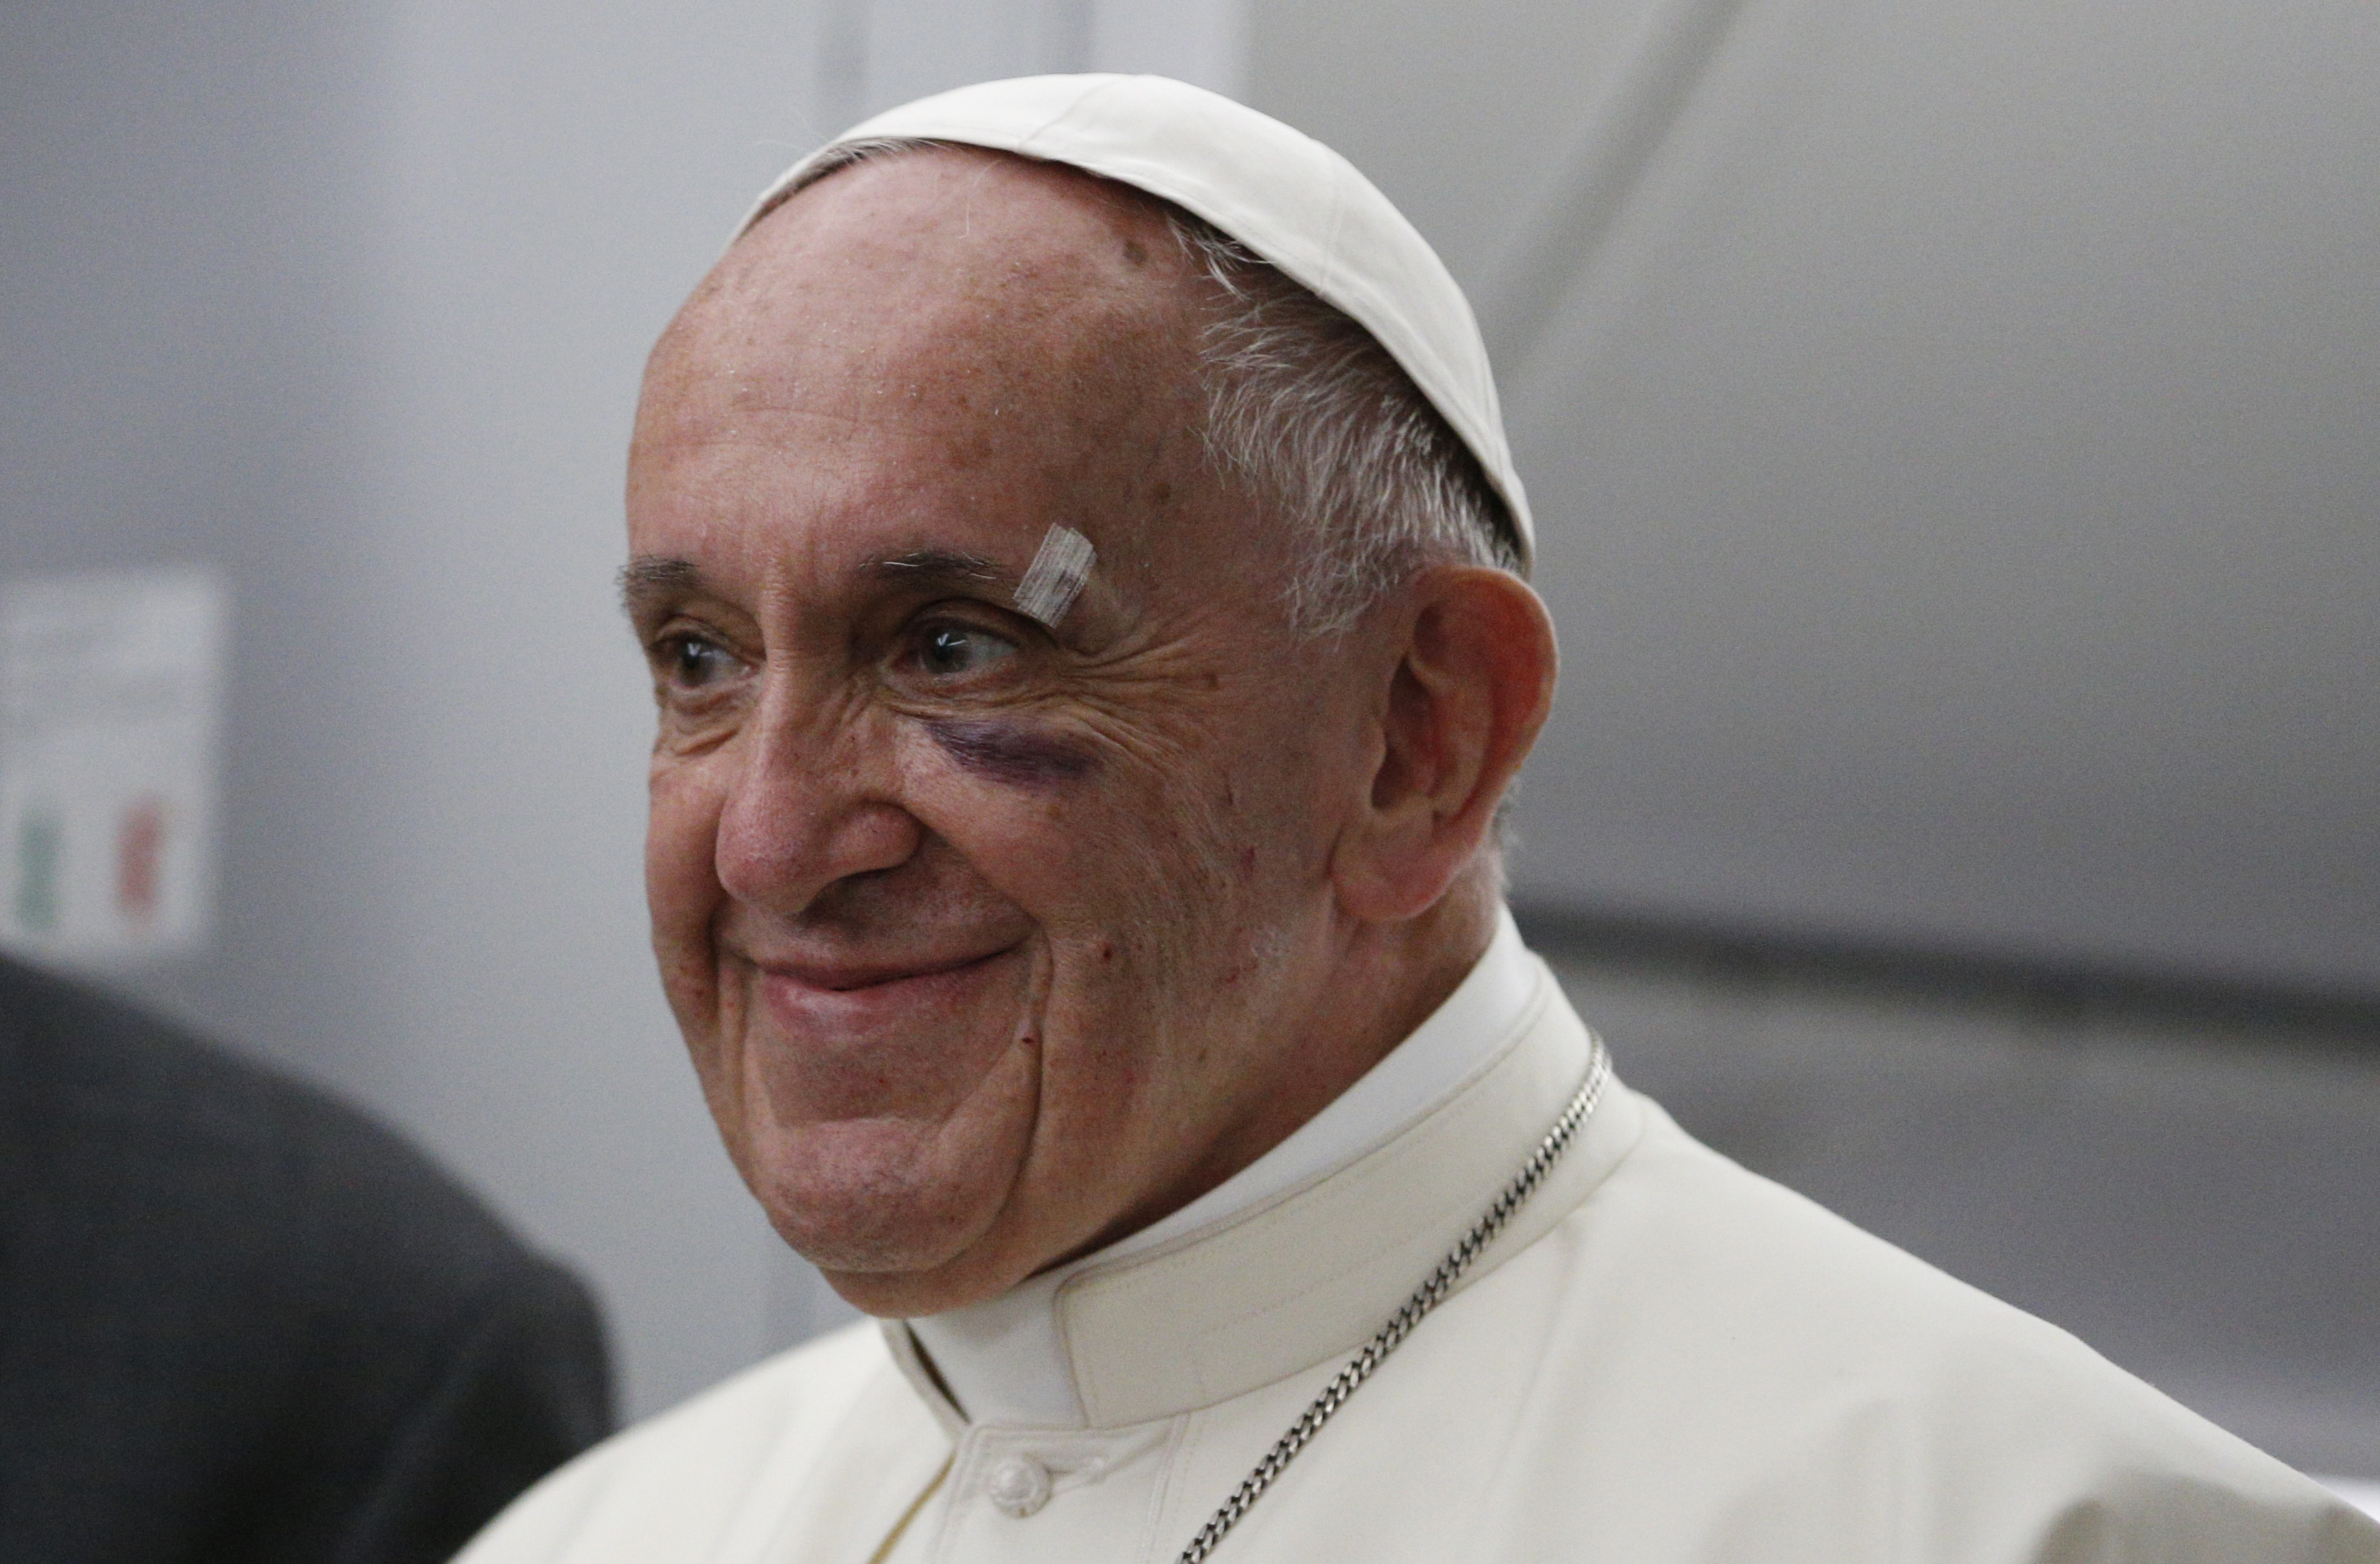 Pope Francis' black eye tells us a lot about the church today ...